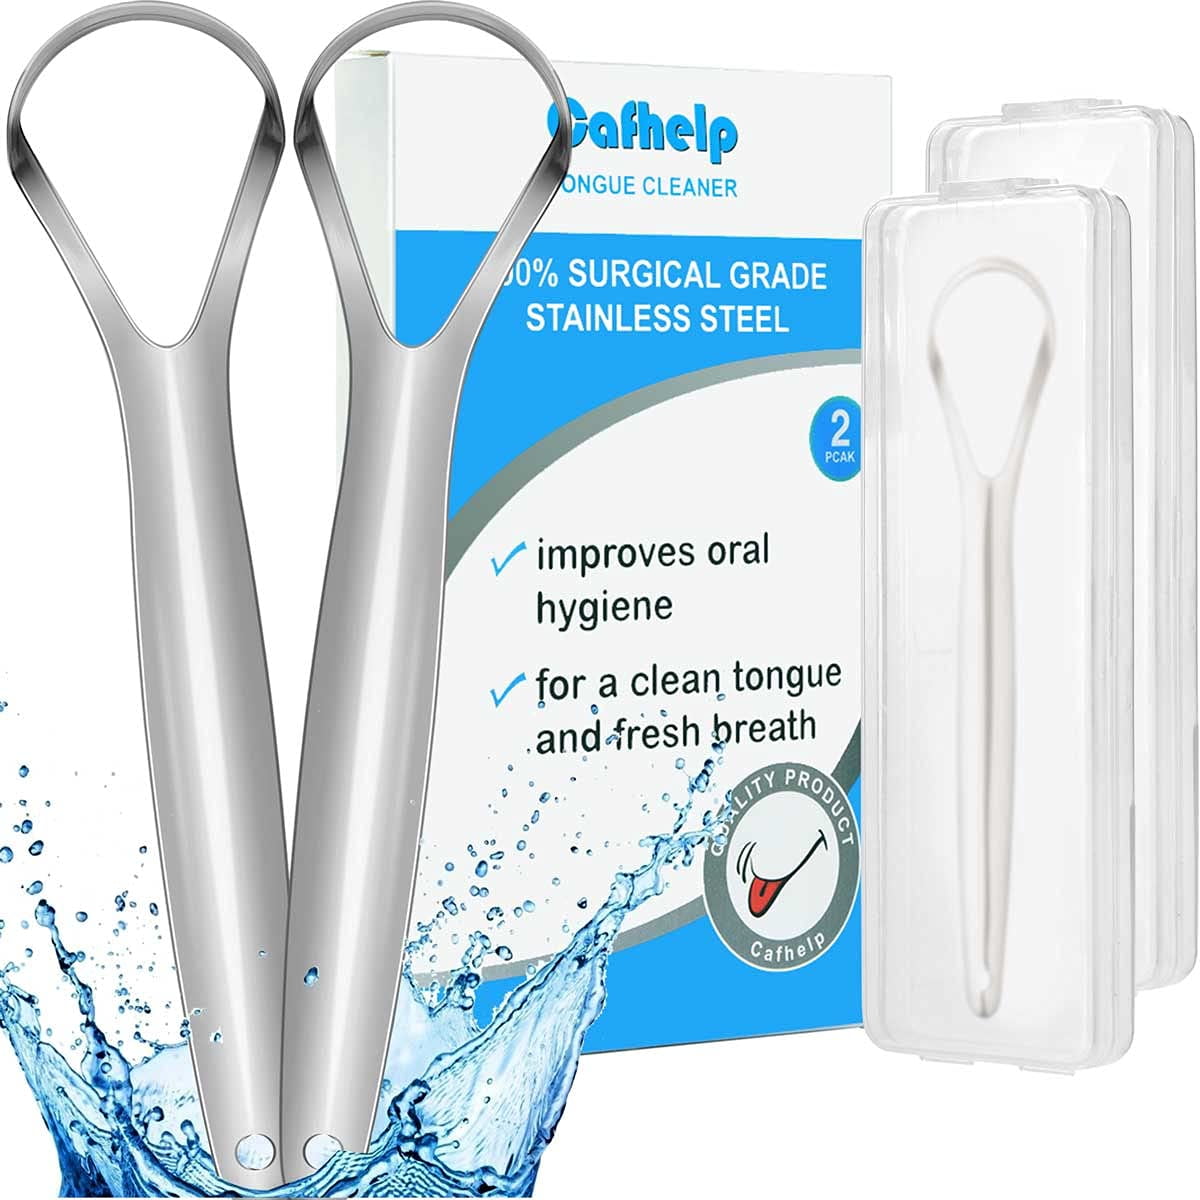 Tongue Scraper Cleaner 100% BPA Free Tongue Scrapers with Travel Handy Case  for Adults, Kids, Healthy Oral Care, Easy to Use, Help Fight Bad Breath (4